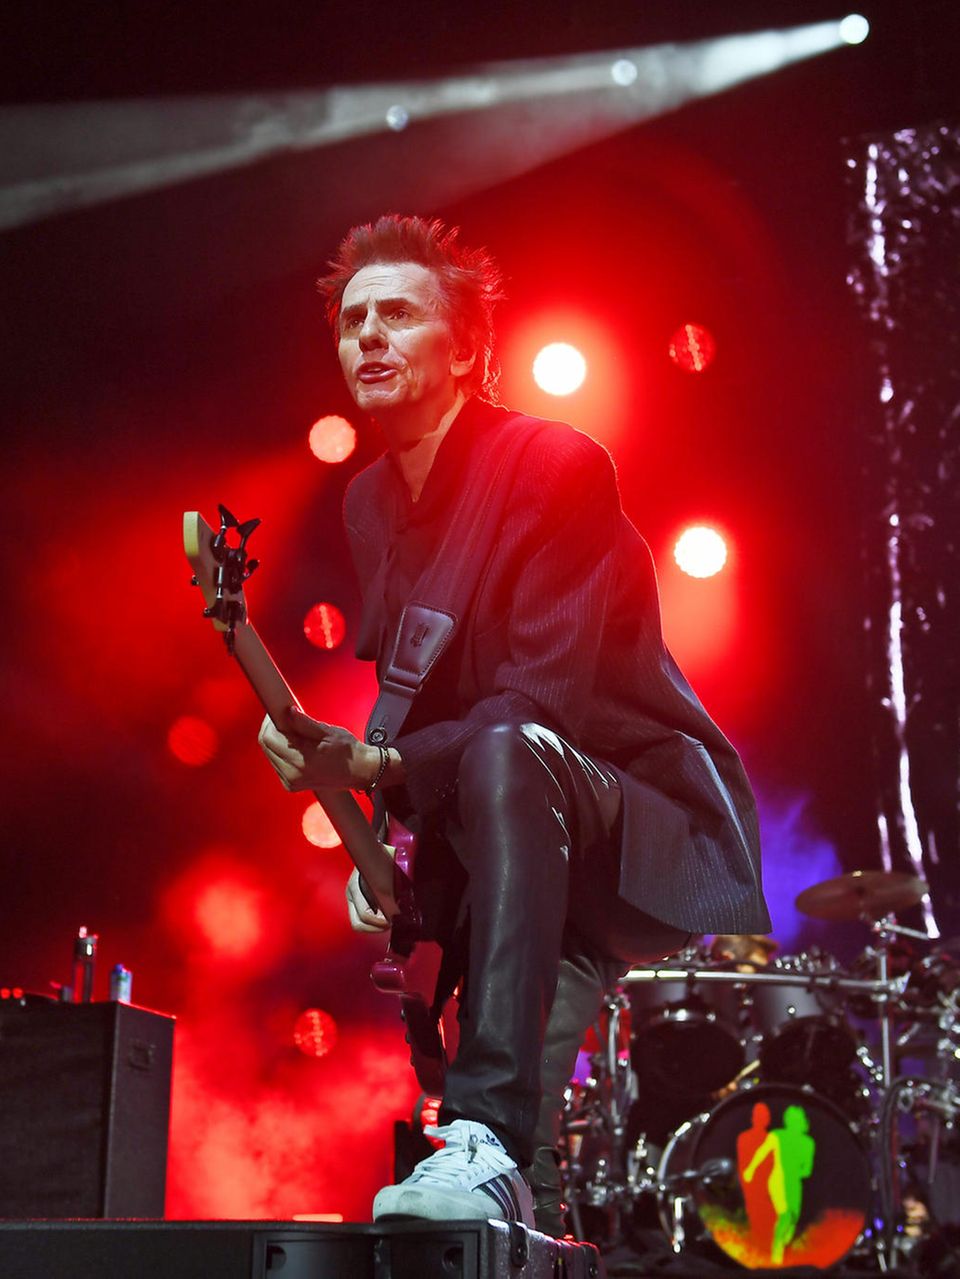 The bassist of Duran Duran performing on stage